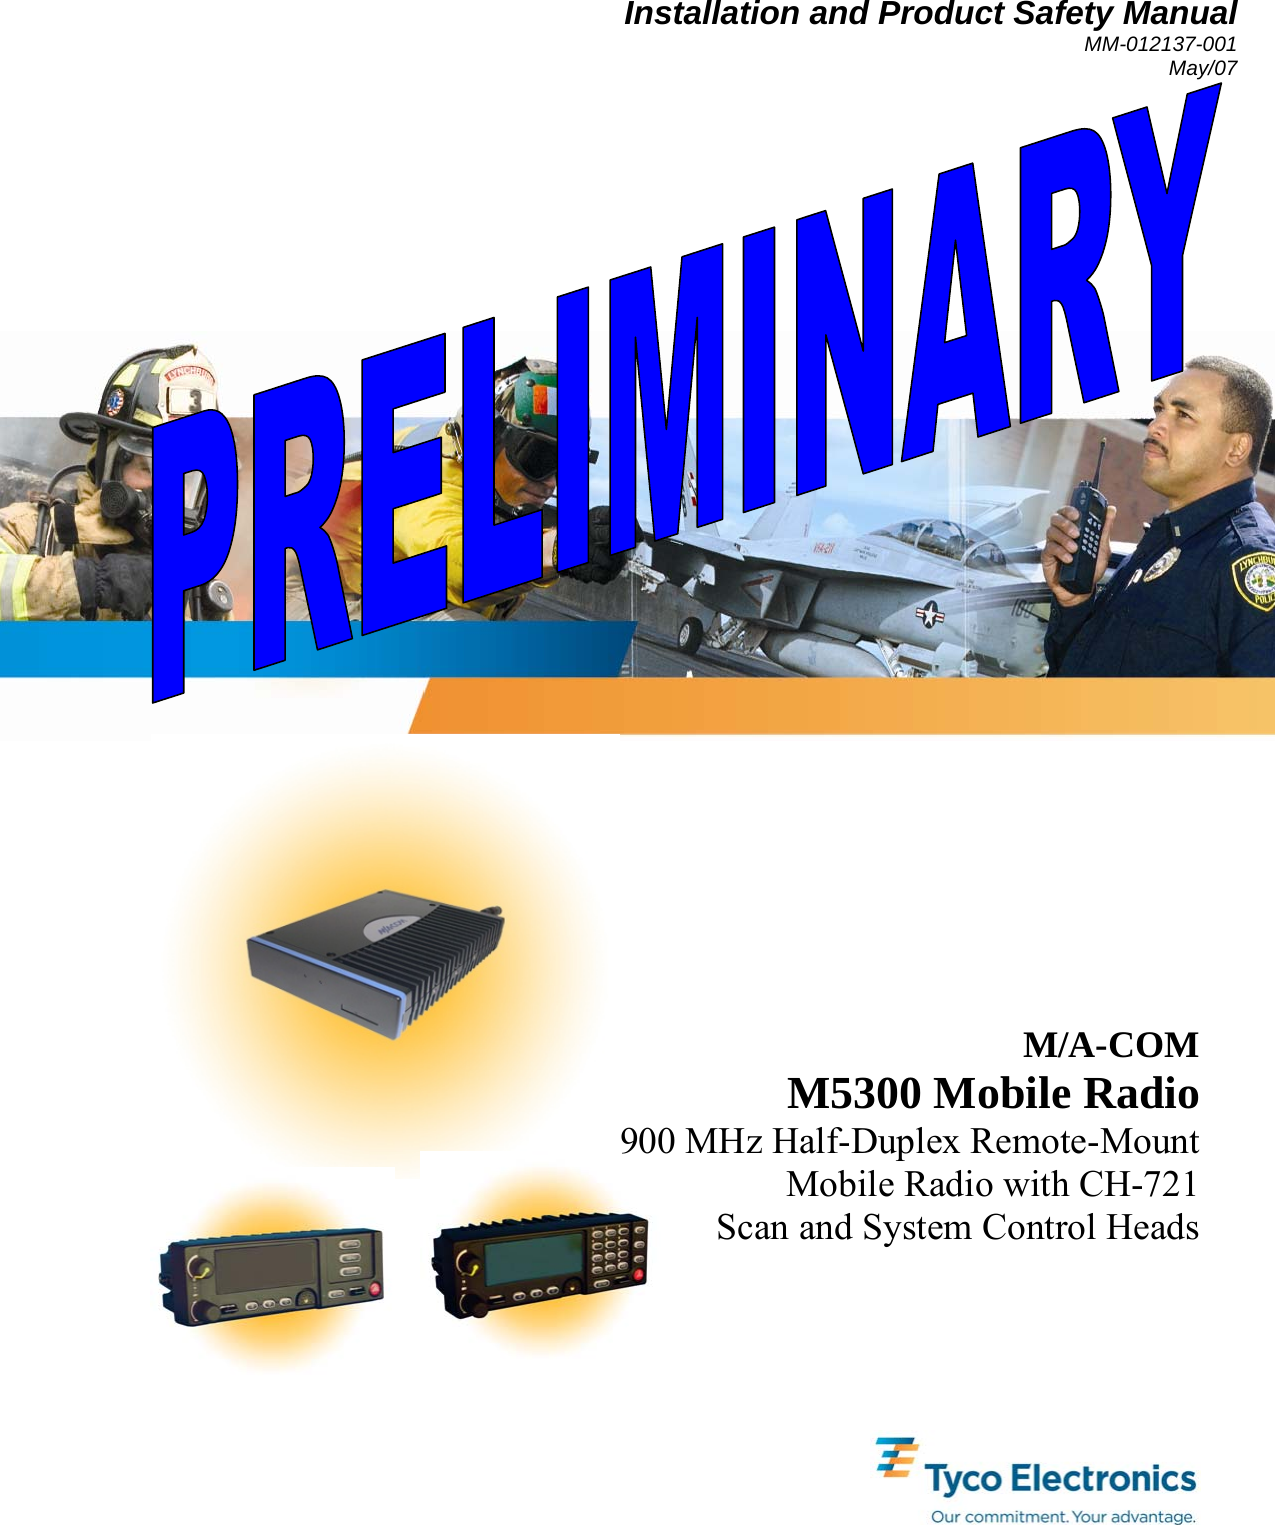 Installation and Product Safety Manual MM-012137-001 May/07  M/A-COM M5300 Mobile Radio 900 MHz Half-Duplex Remote-Mount Mobile Radio with CH-721 Scan and System Control Heads 